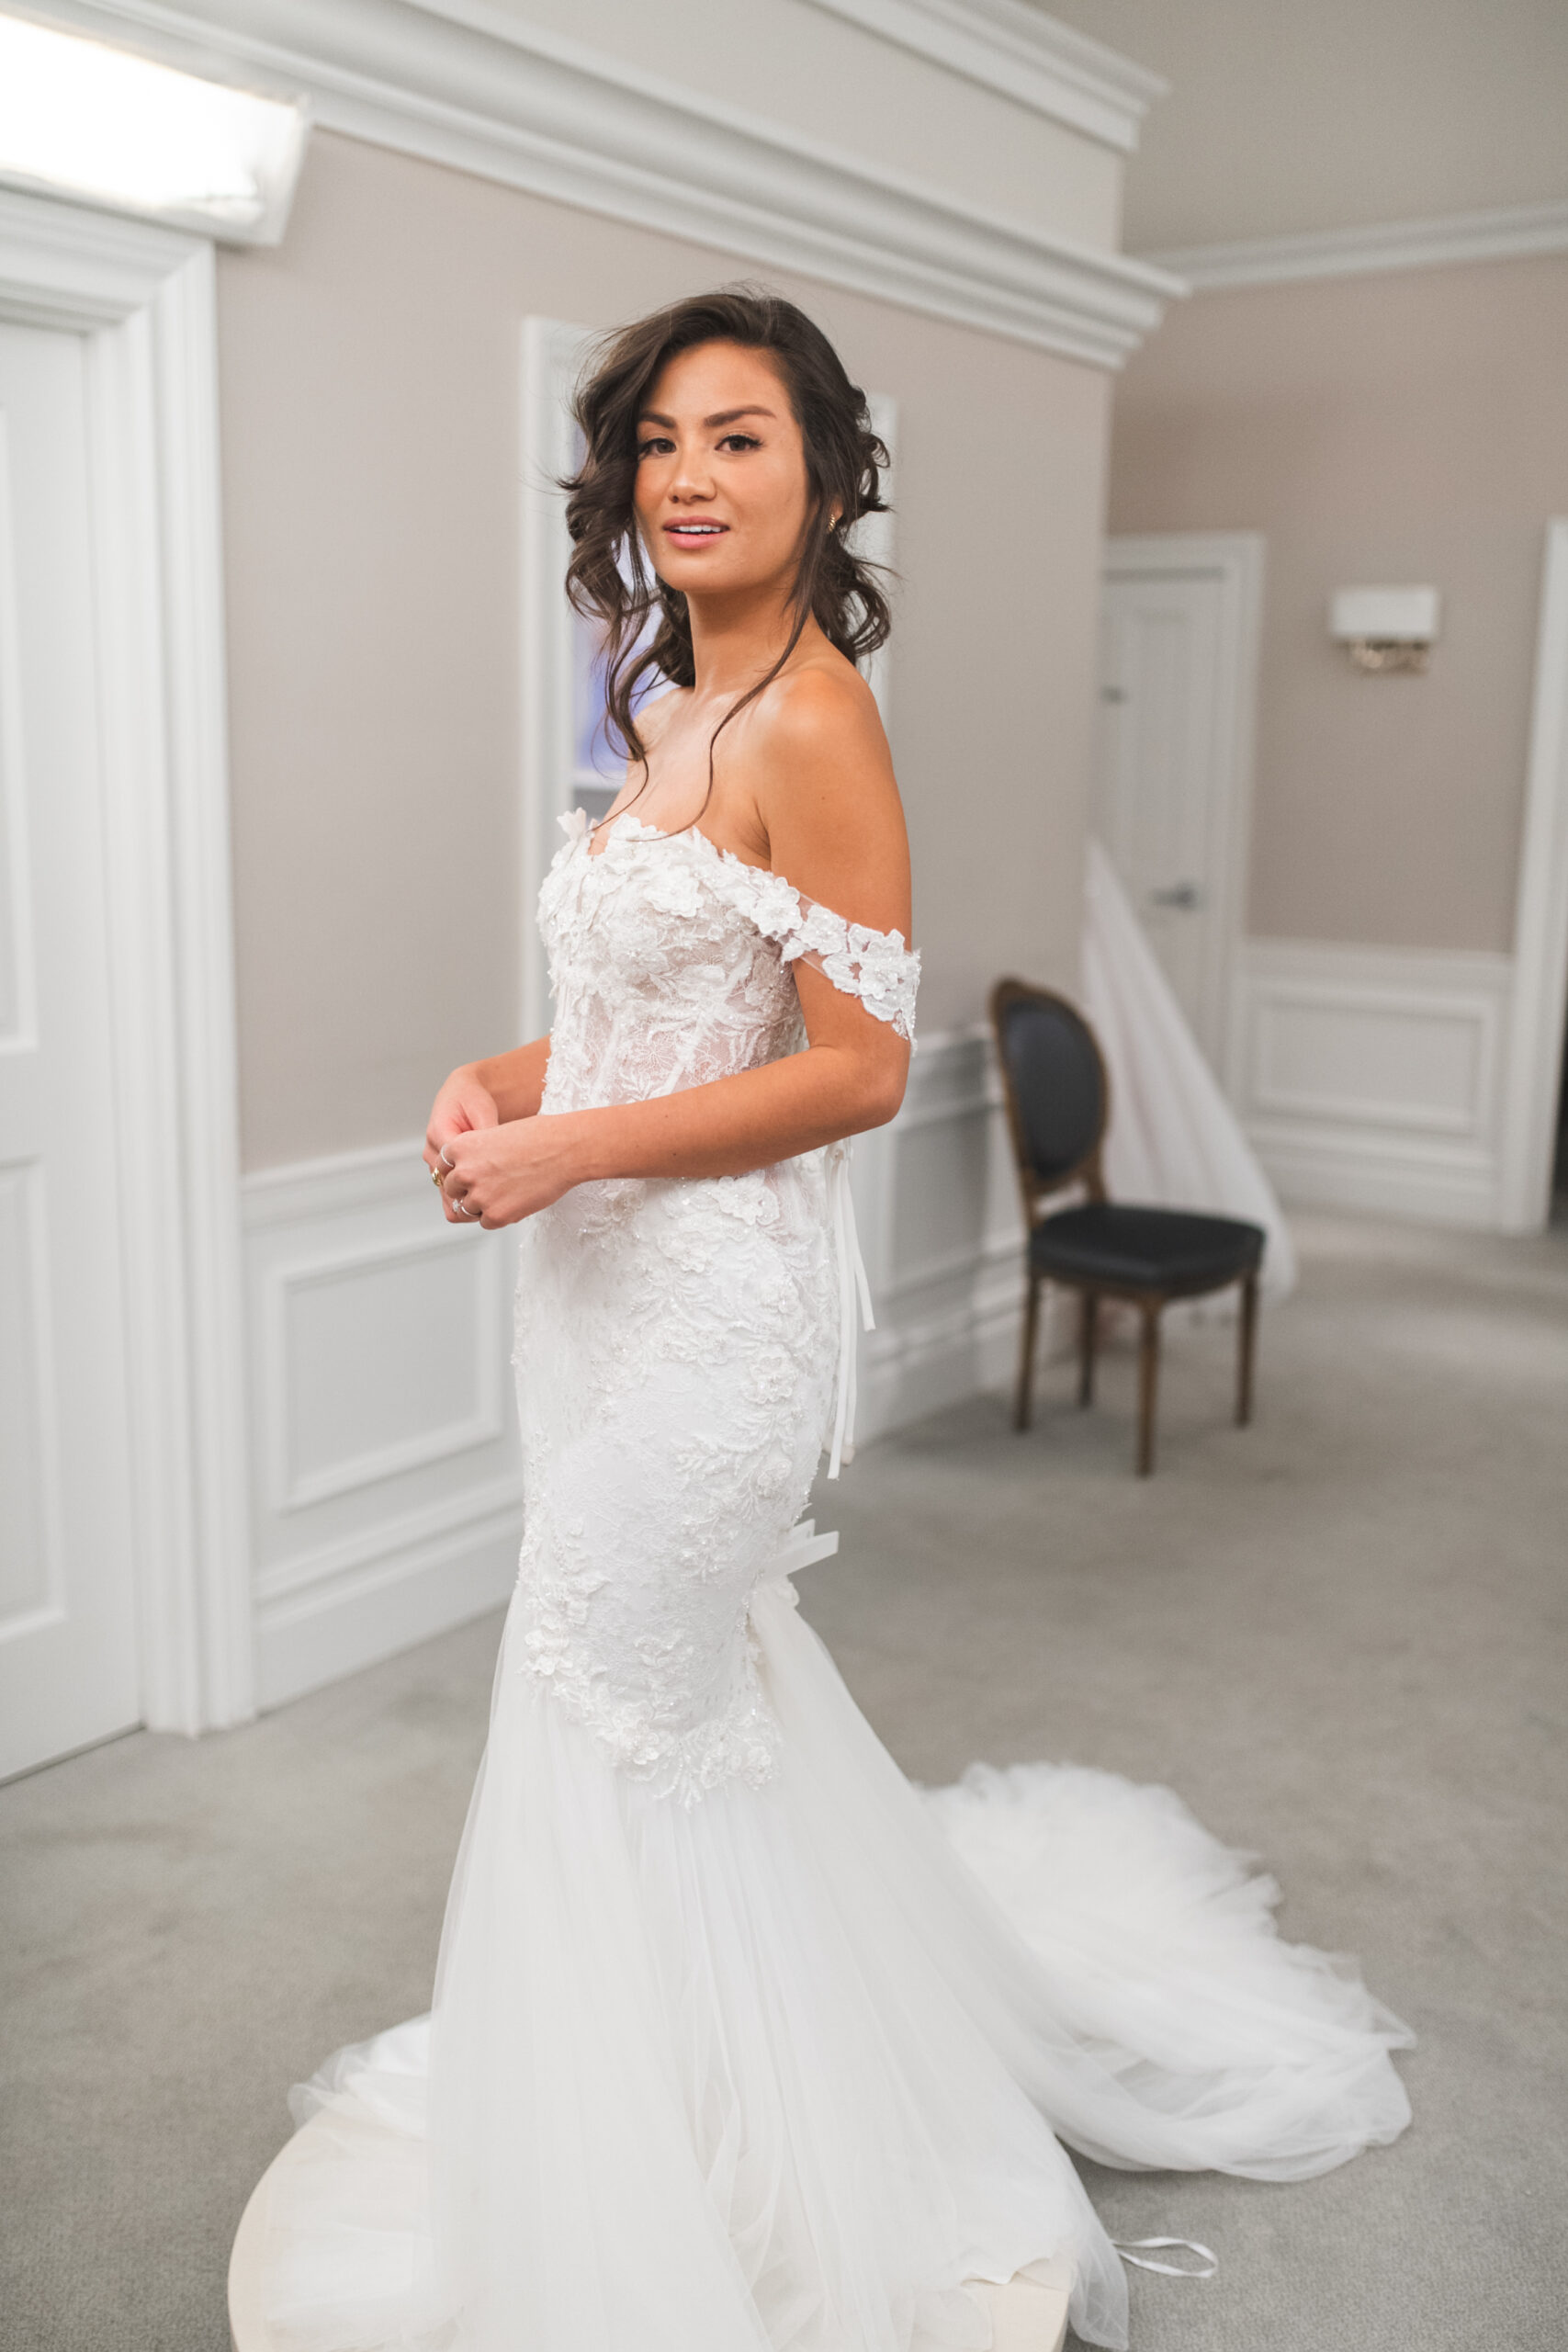 What it's like “Saying Yes to the Dress” at Kleinfeld Bridal | Pre- u0026  Post-COVID - with love caila